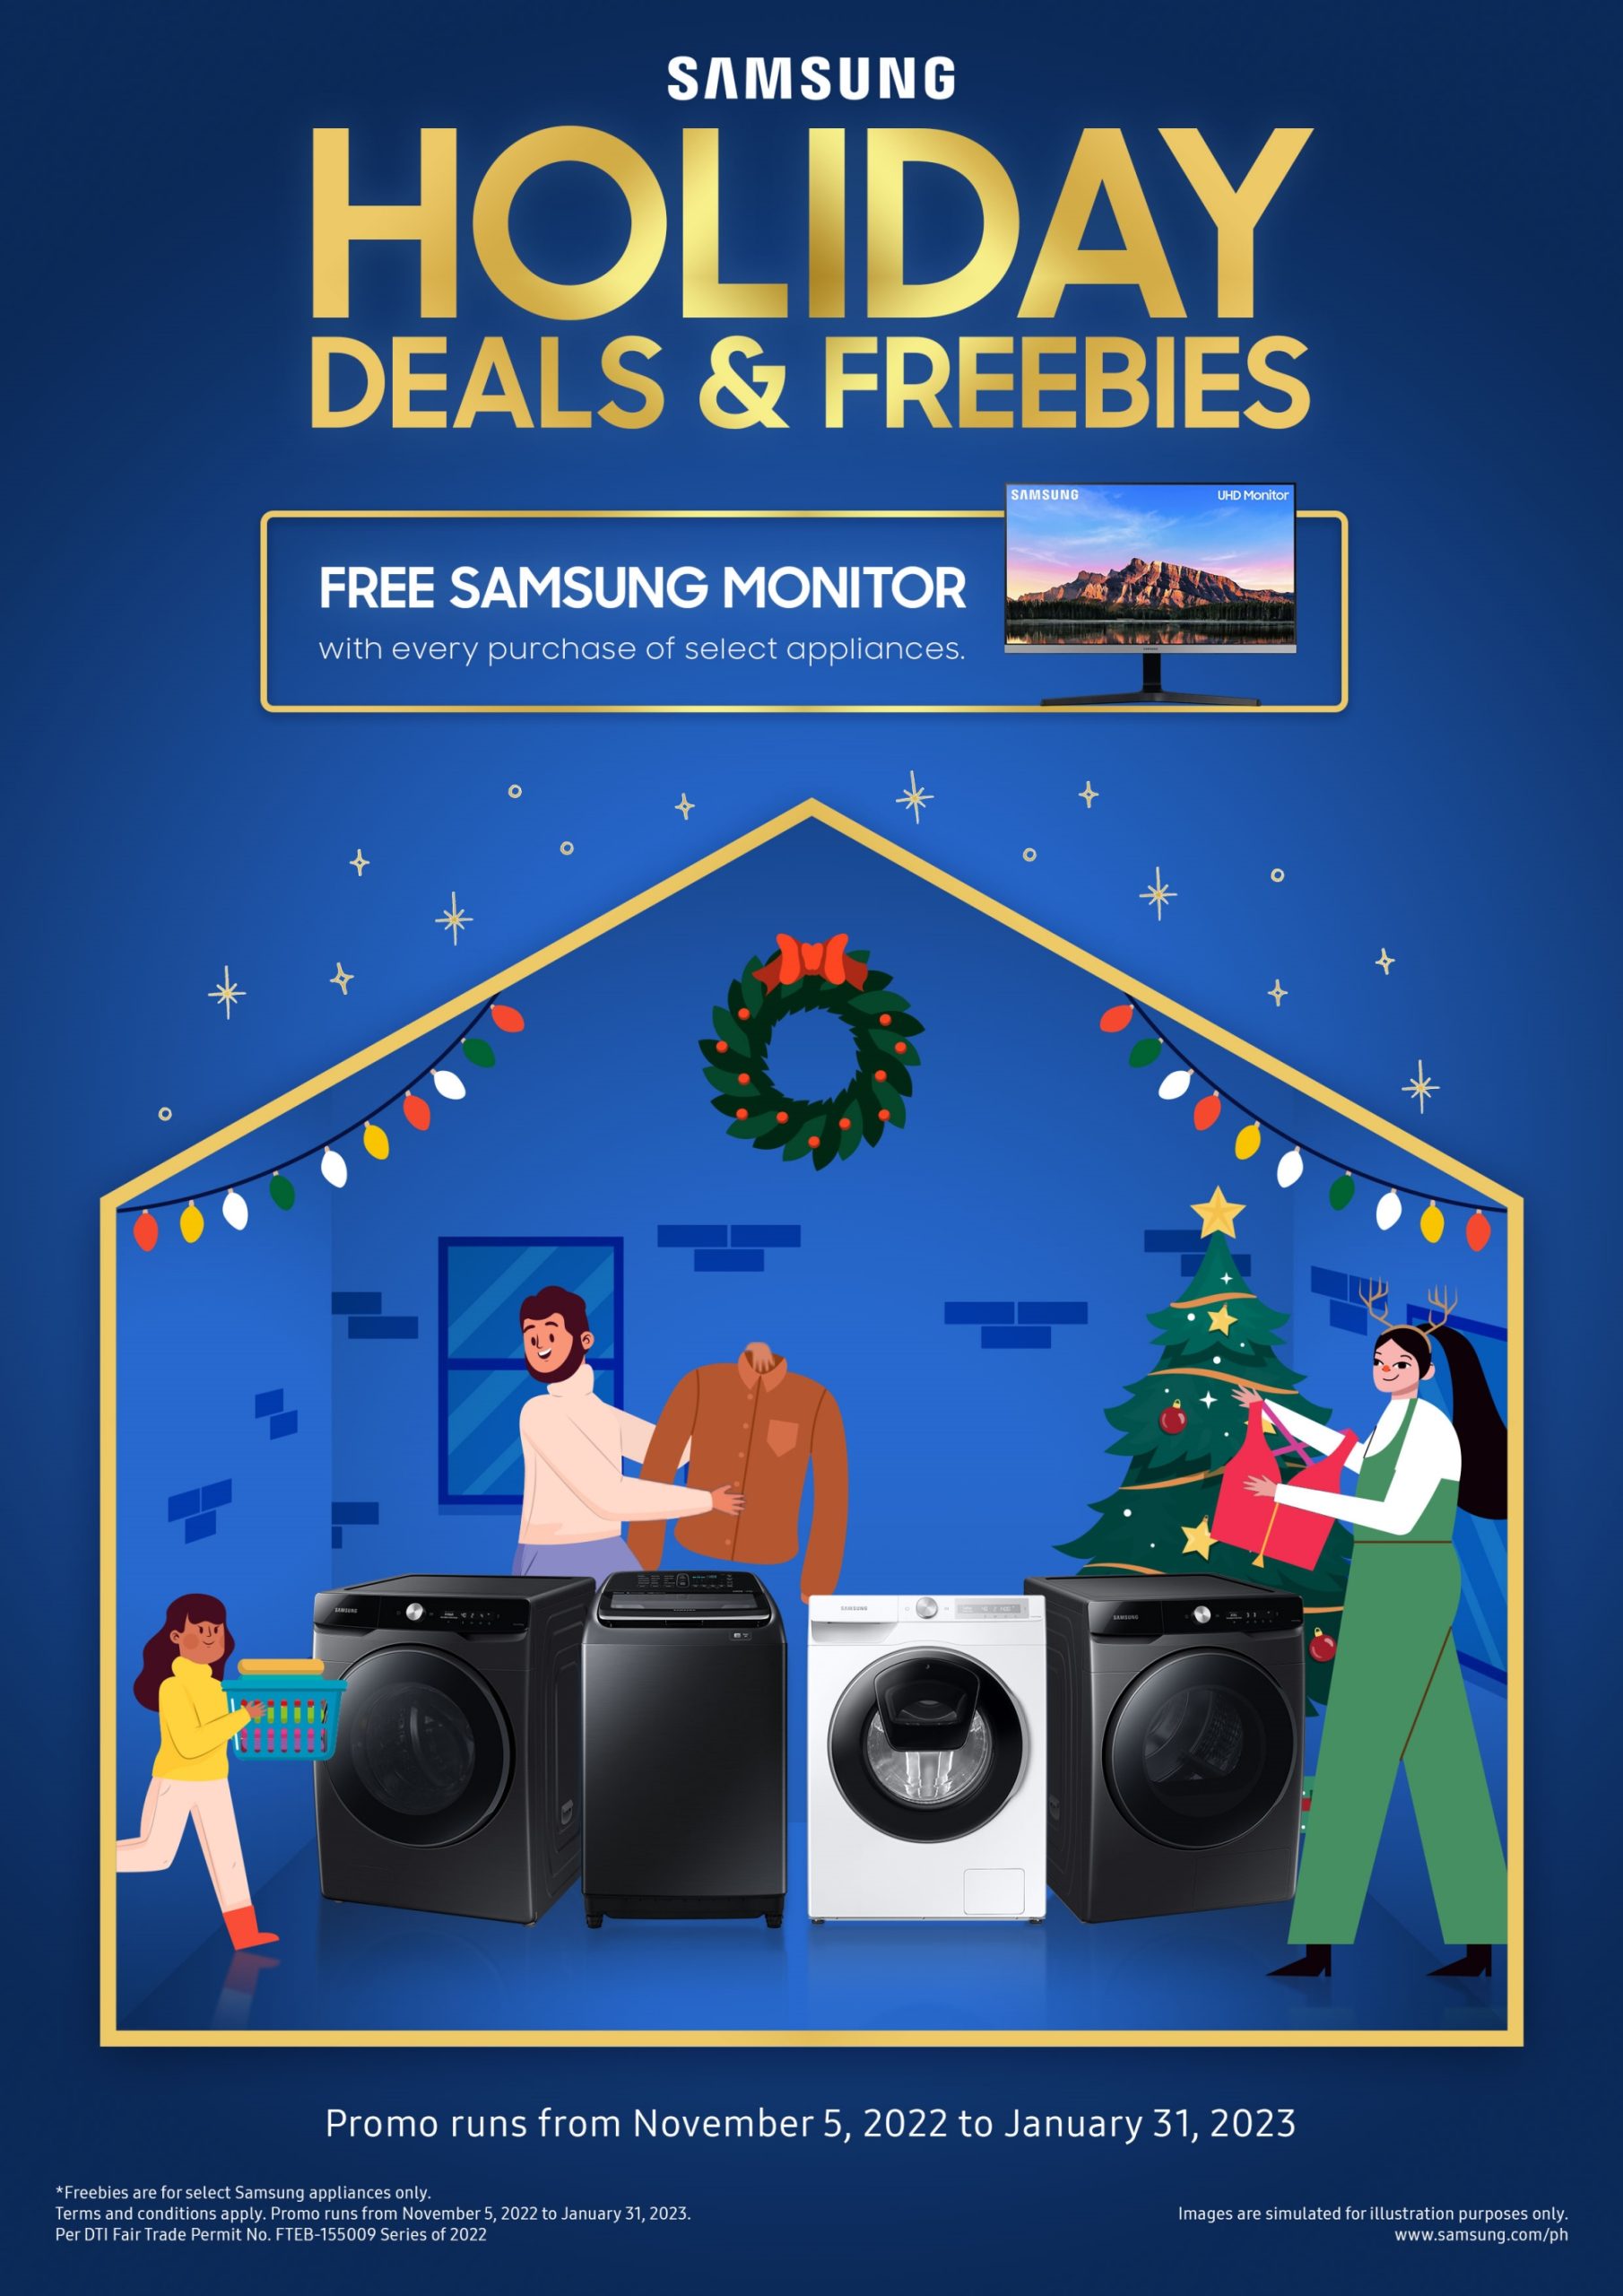 All the holiday deals and freebies from Samsung Digital Appliances this Christmas